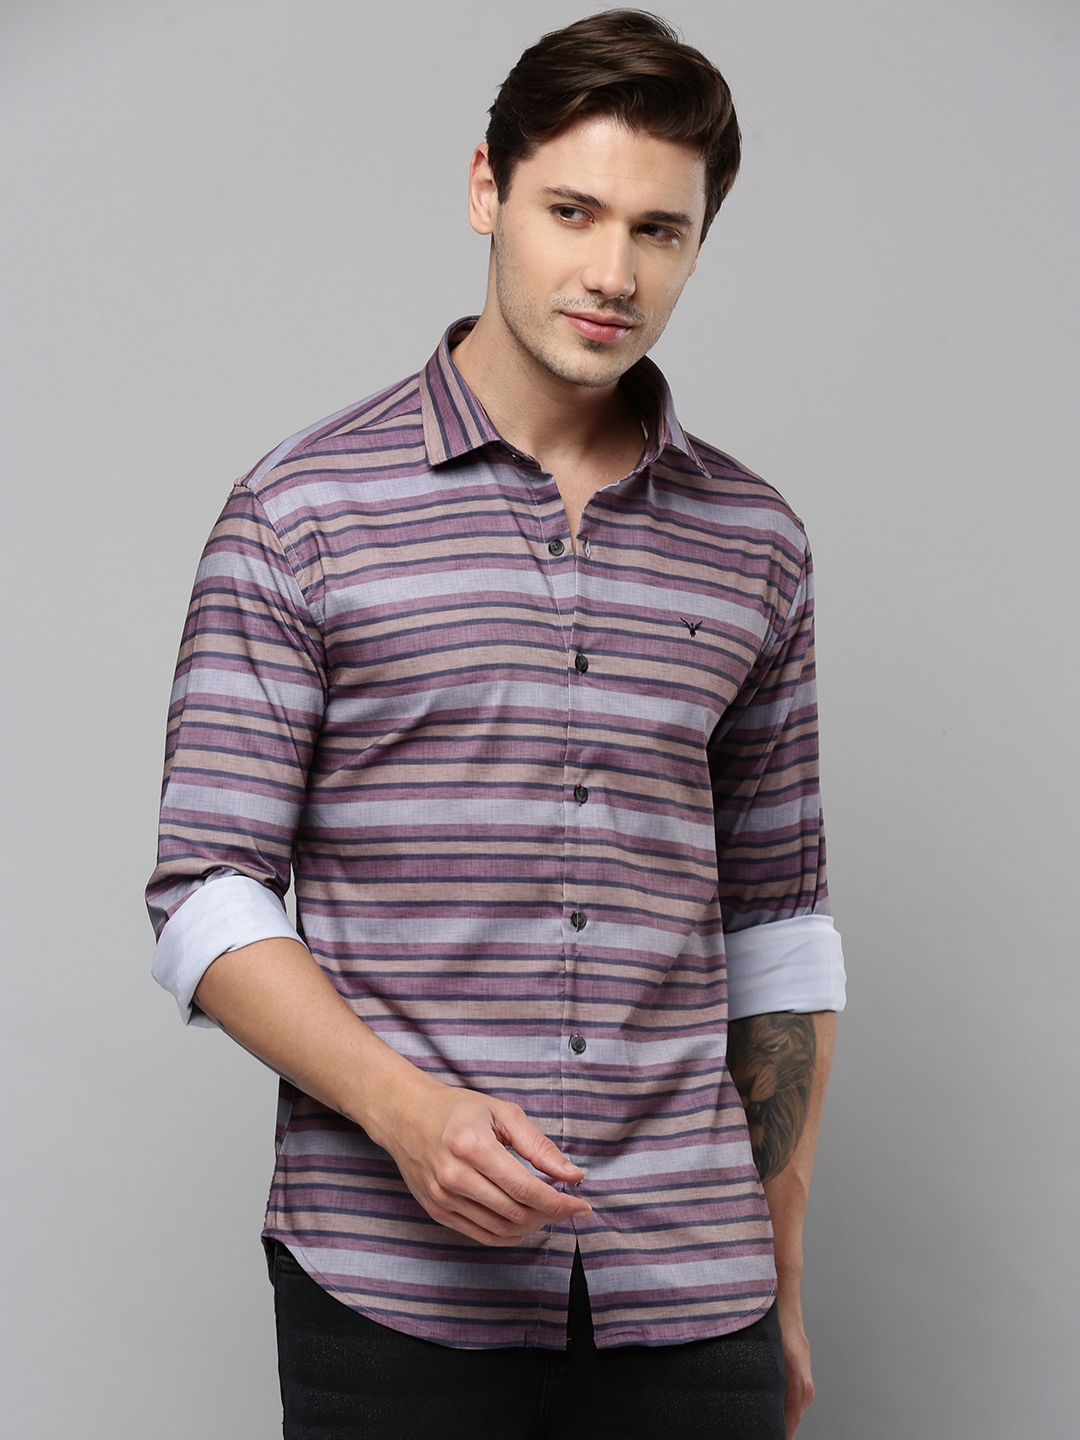 Showoff | SHOWOFF Men's Spread Collar Long Sleeves Striped Multi Shirt 1